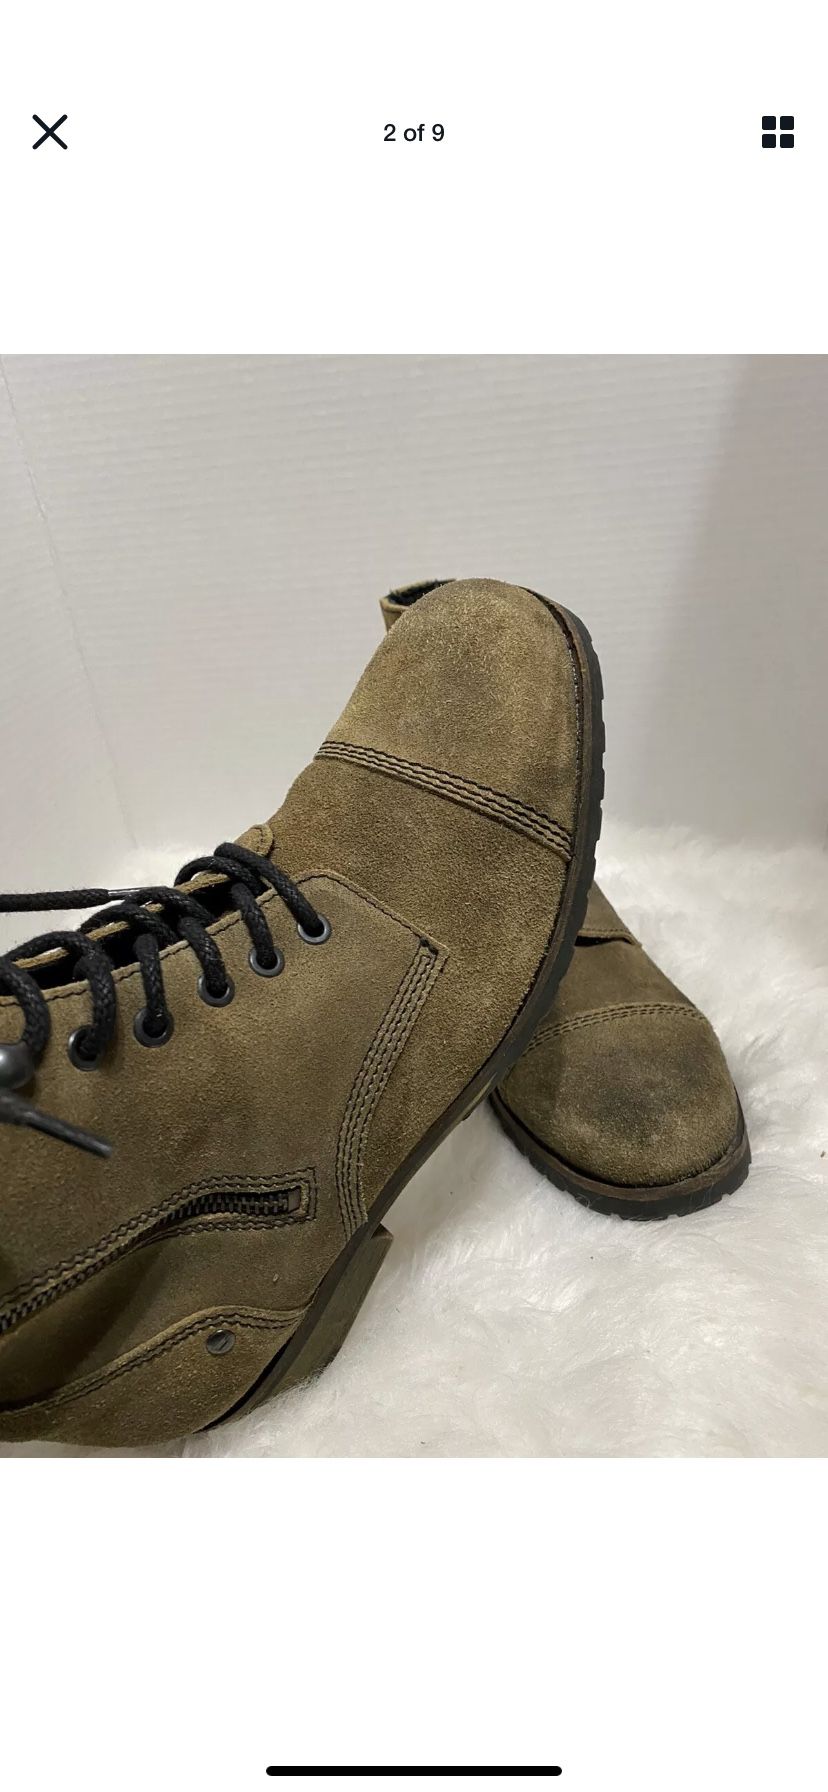 ALDO Dark Green Suede Leather Lace Up Ankle Boots Men Size 9 us Euro 43